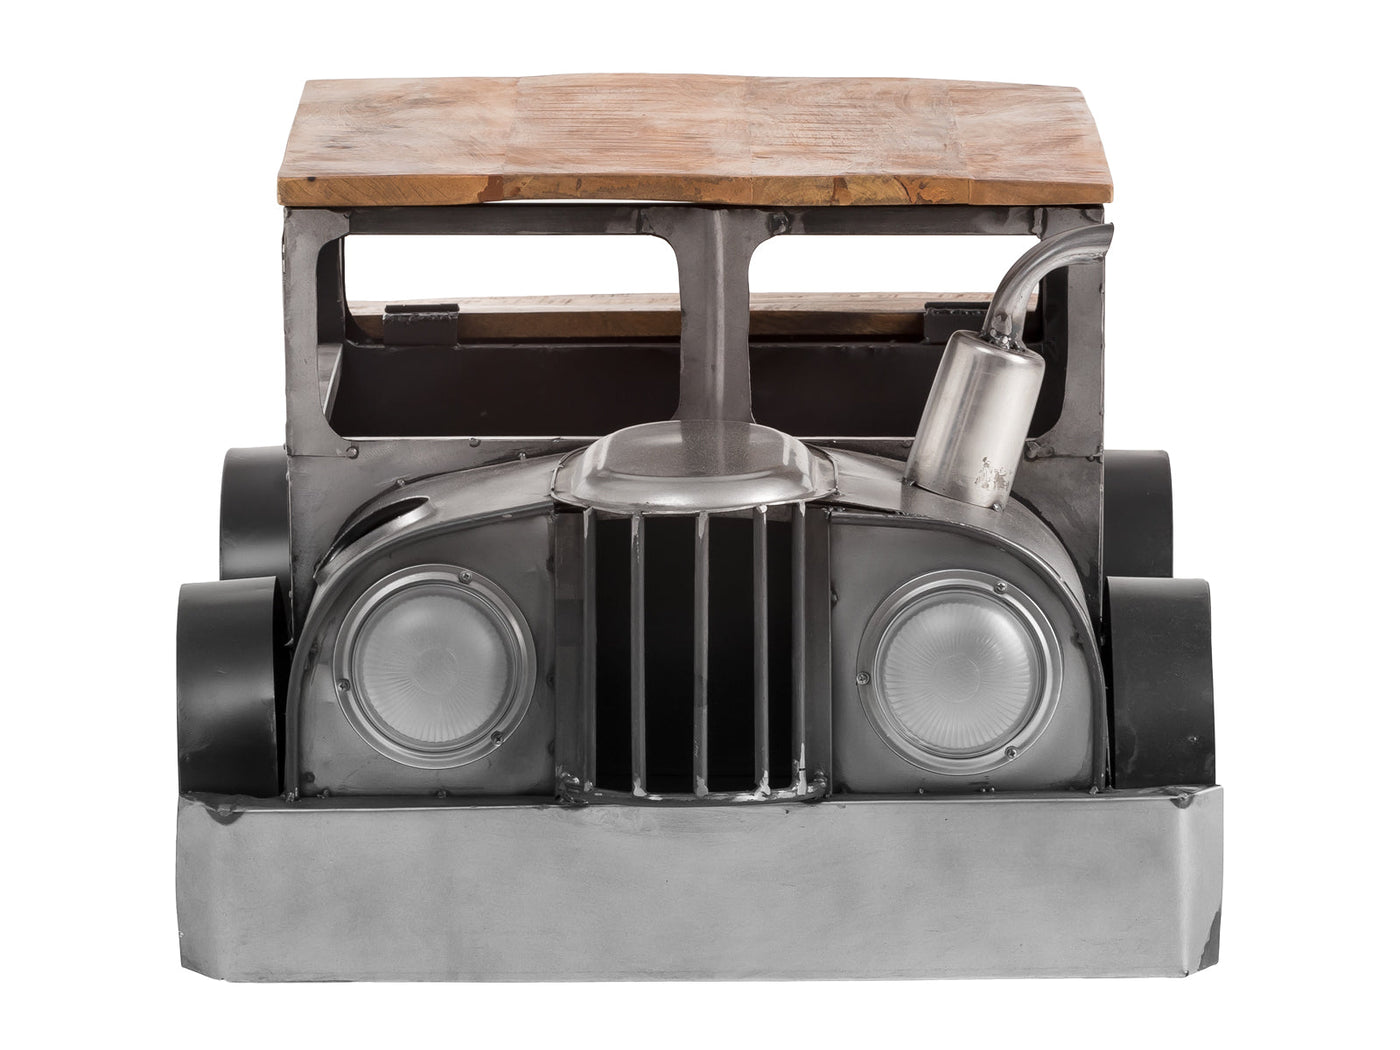 42’ Grey And Brown Vintage Style Truck Solid Wood and Metal Coffee Table - Coffee Tables